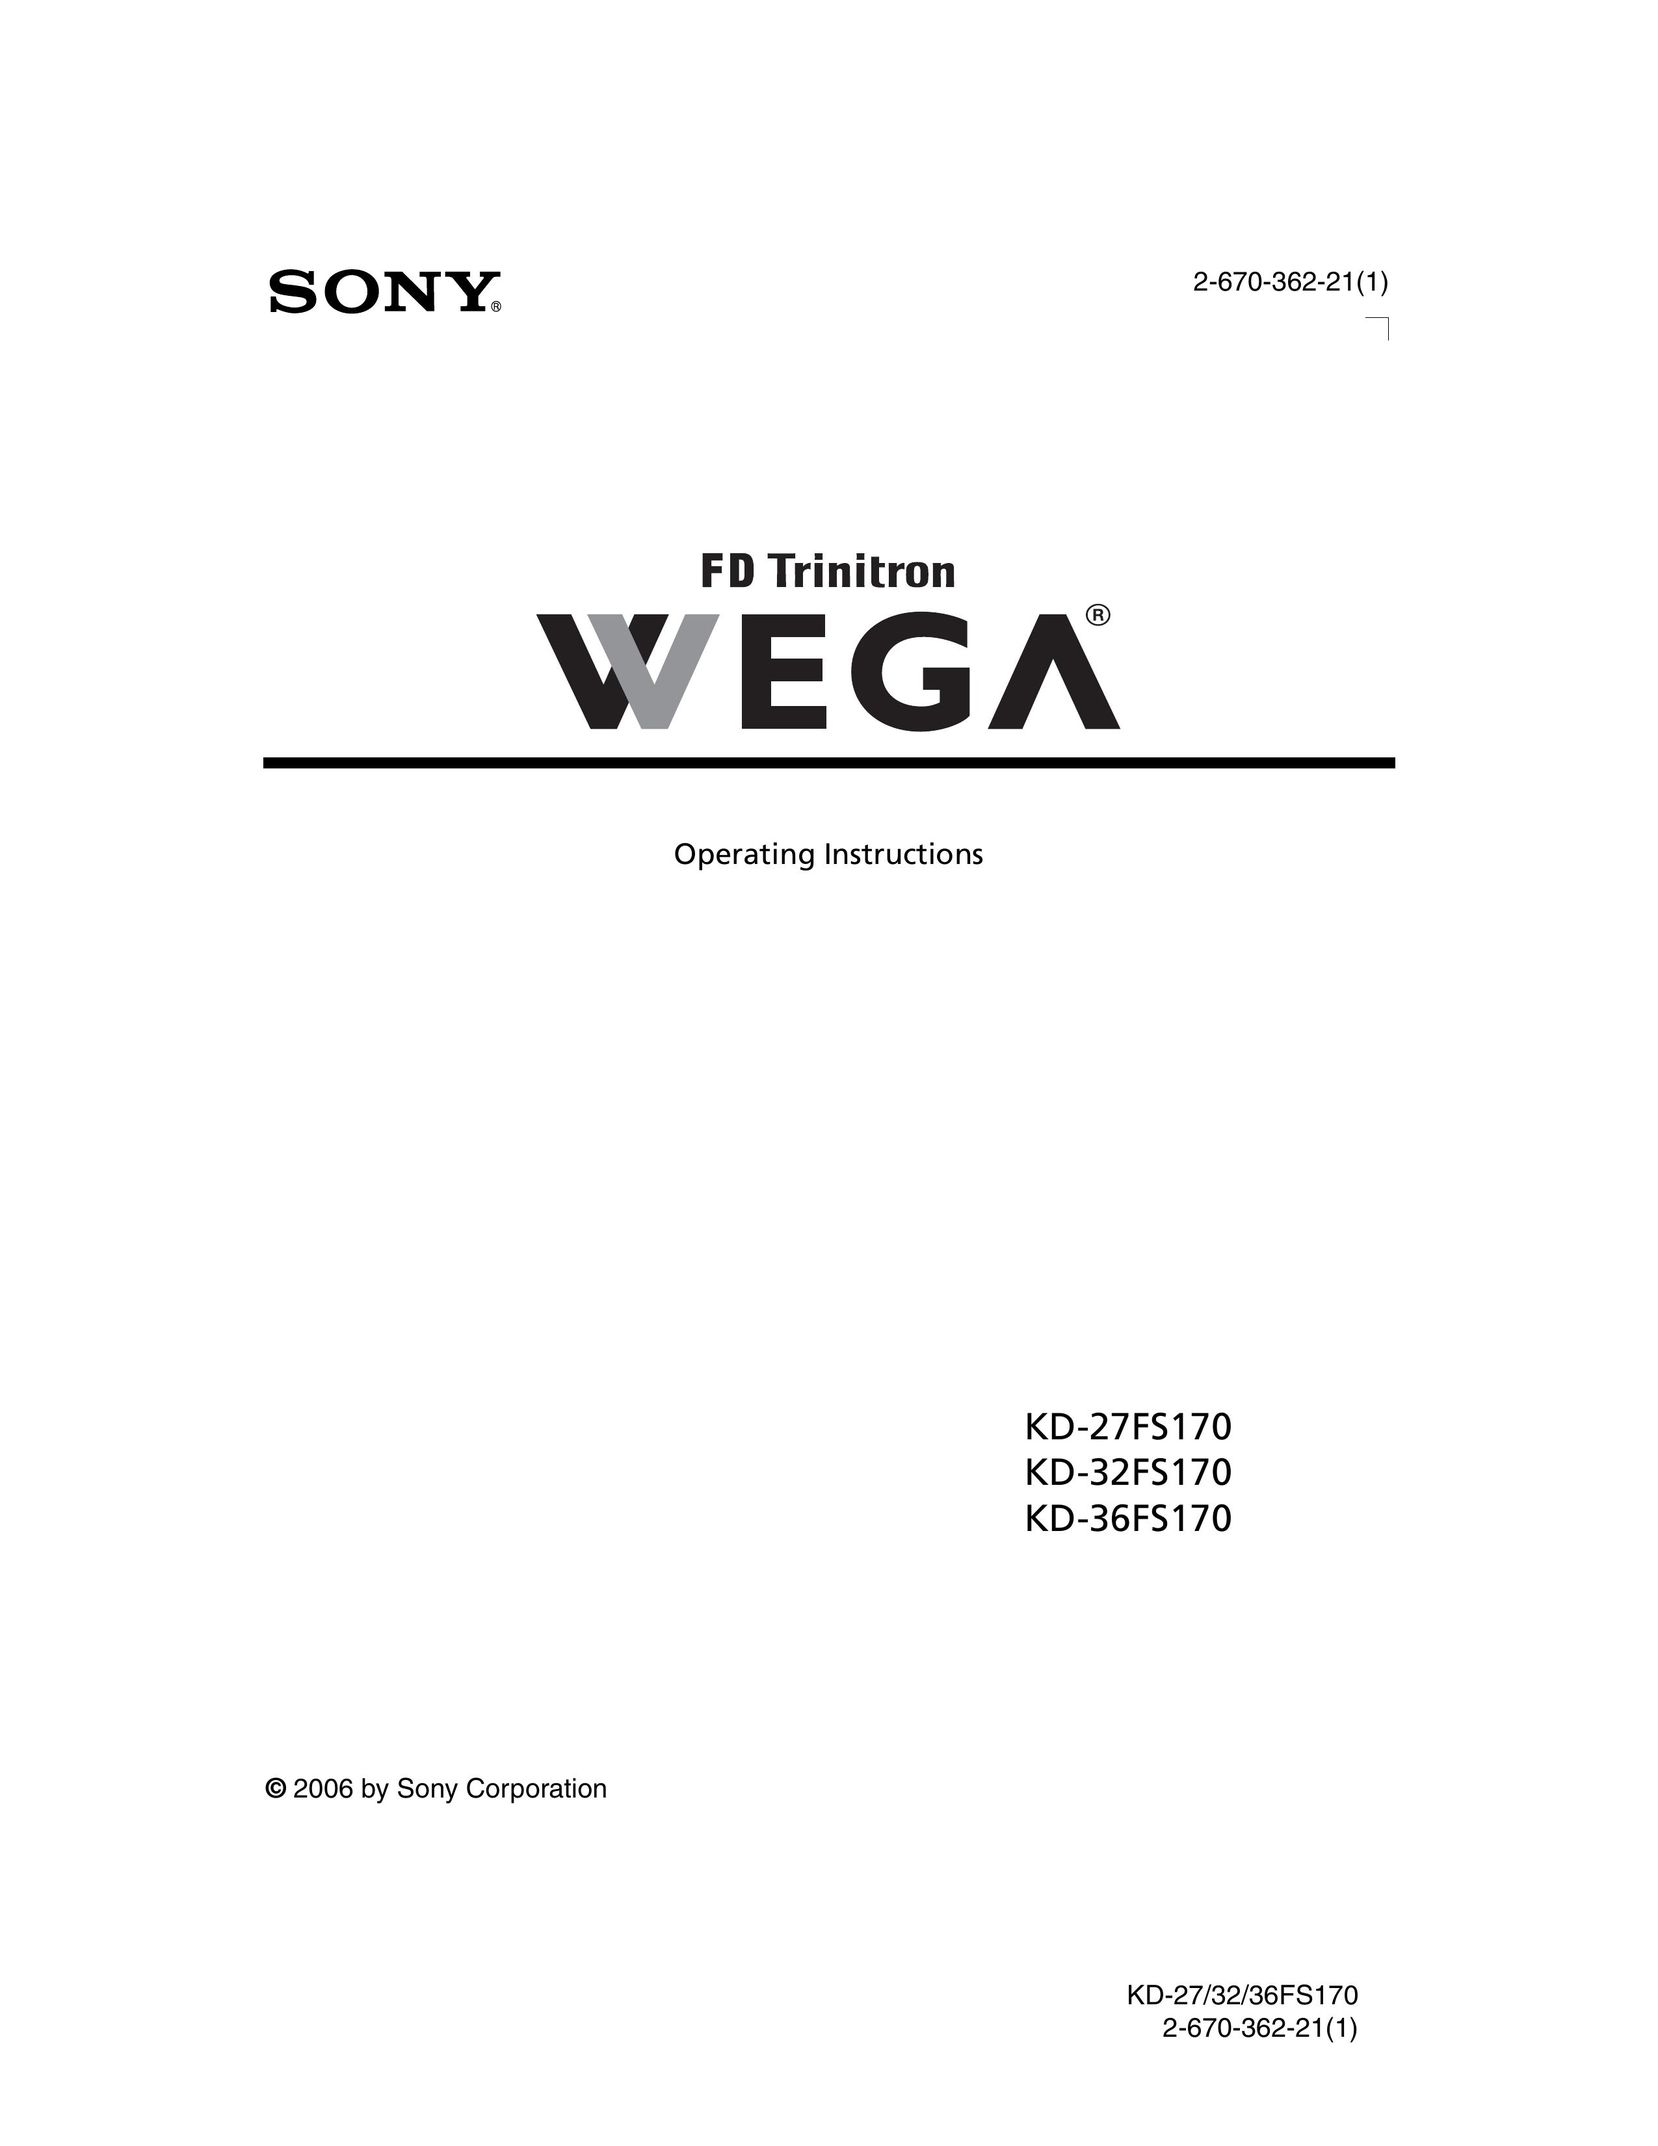 Sony KD 27FS170 CRT Television User Manual